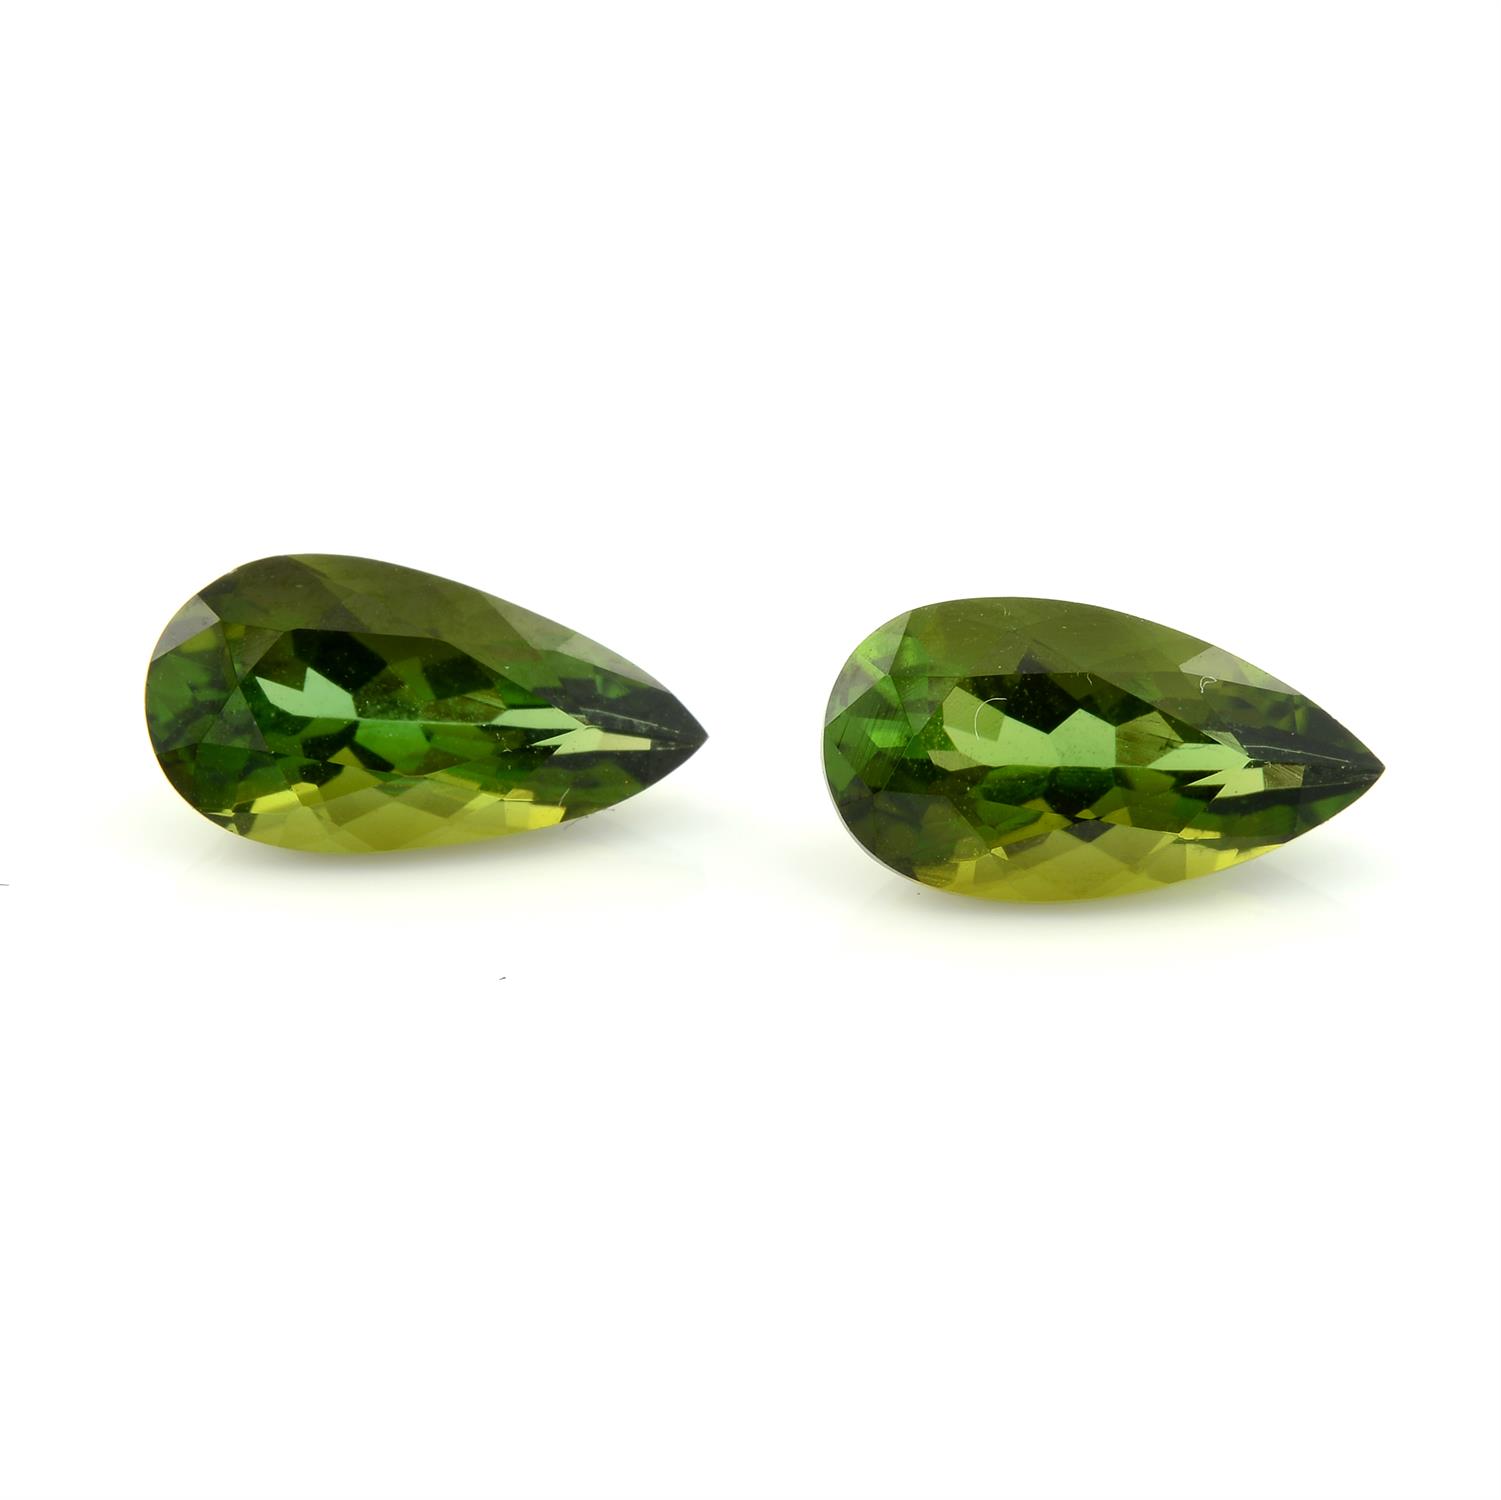 Two pear-shape green tourmalines, weight 1.39cts and 1.33cts.